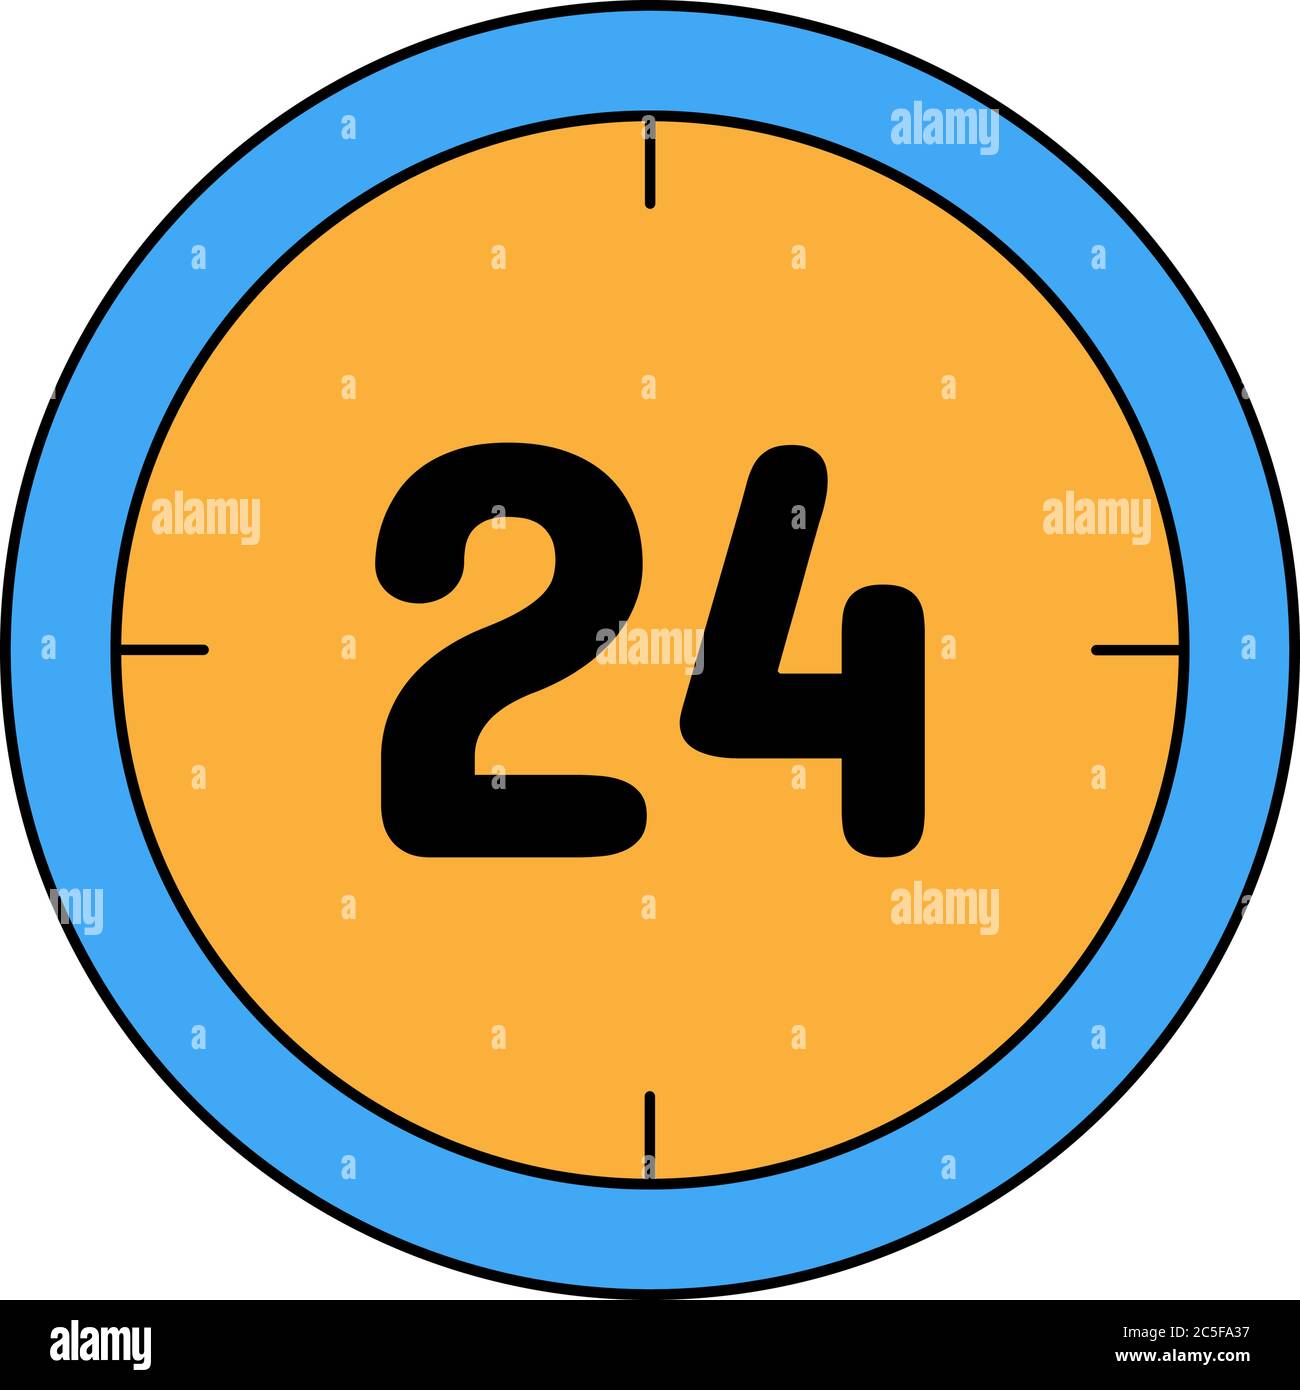 24 hours clock icon always open or fast shipping online store concept vector illustration Stock Vector